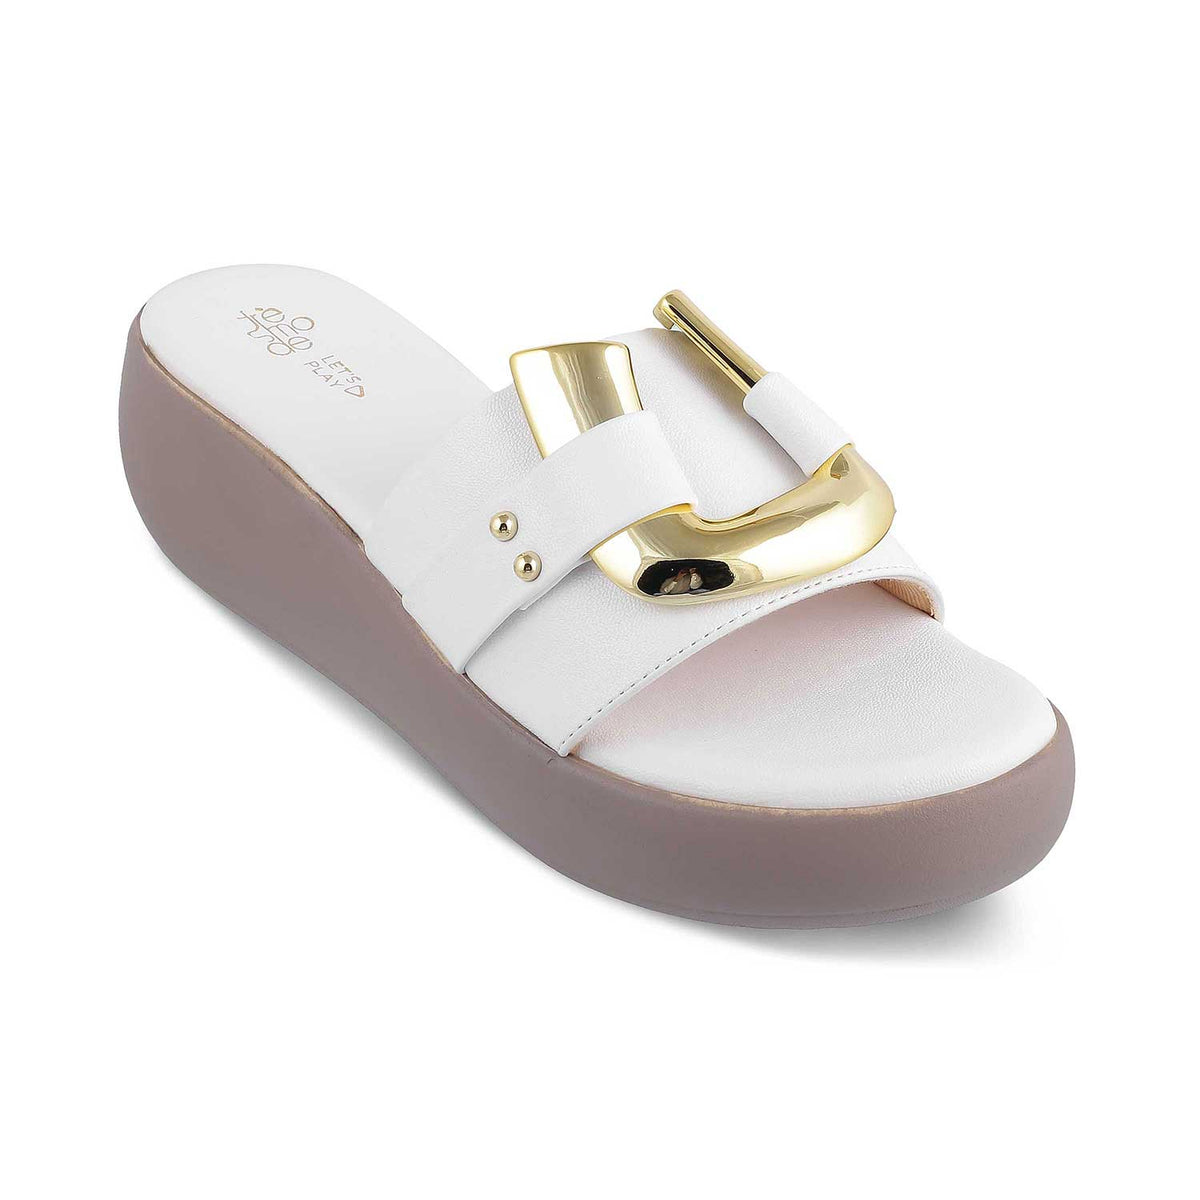 The Shorse White Women's Dress Wedge Sandals Tresmode